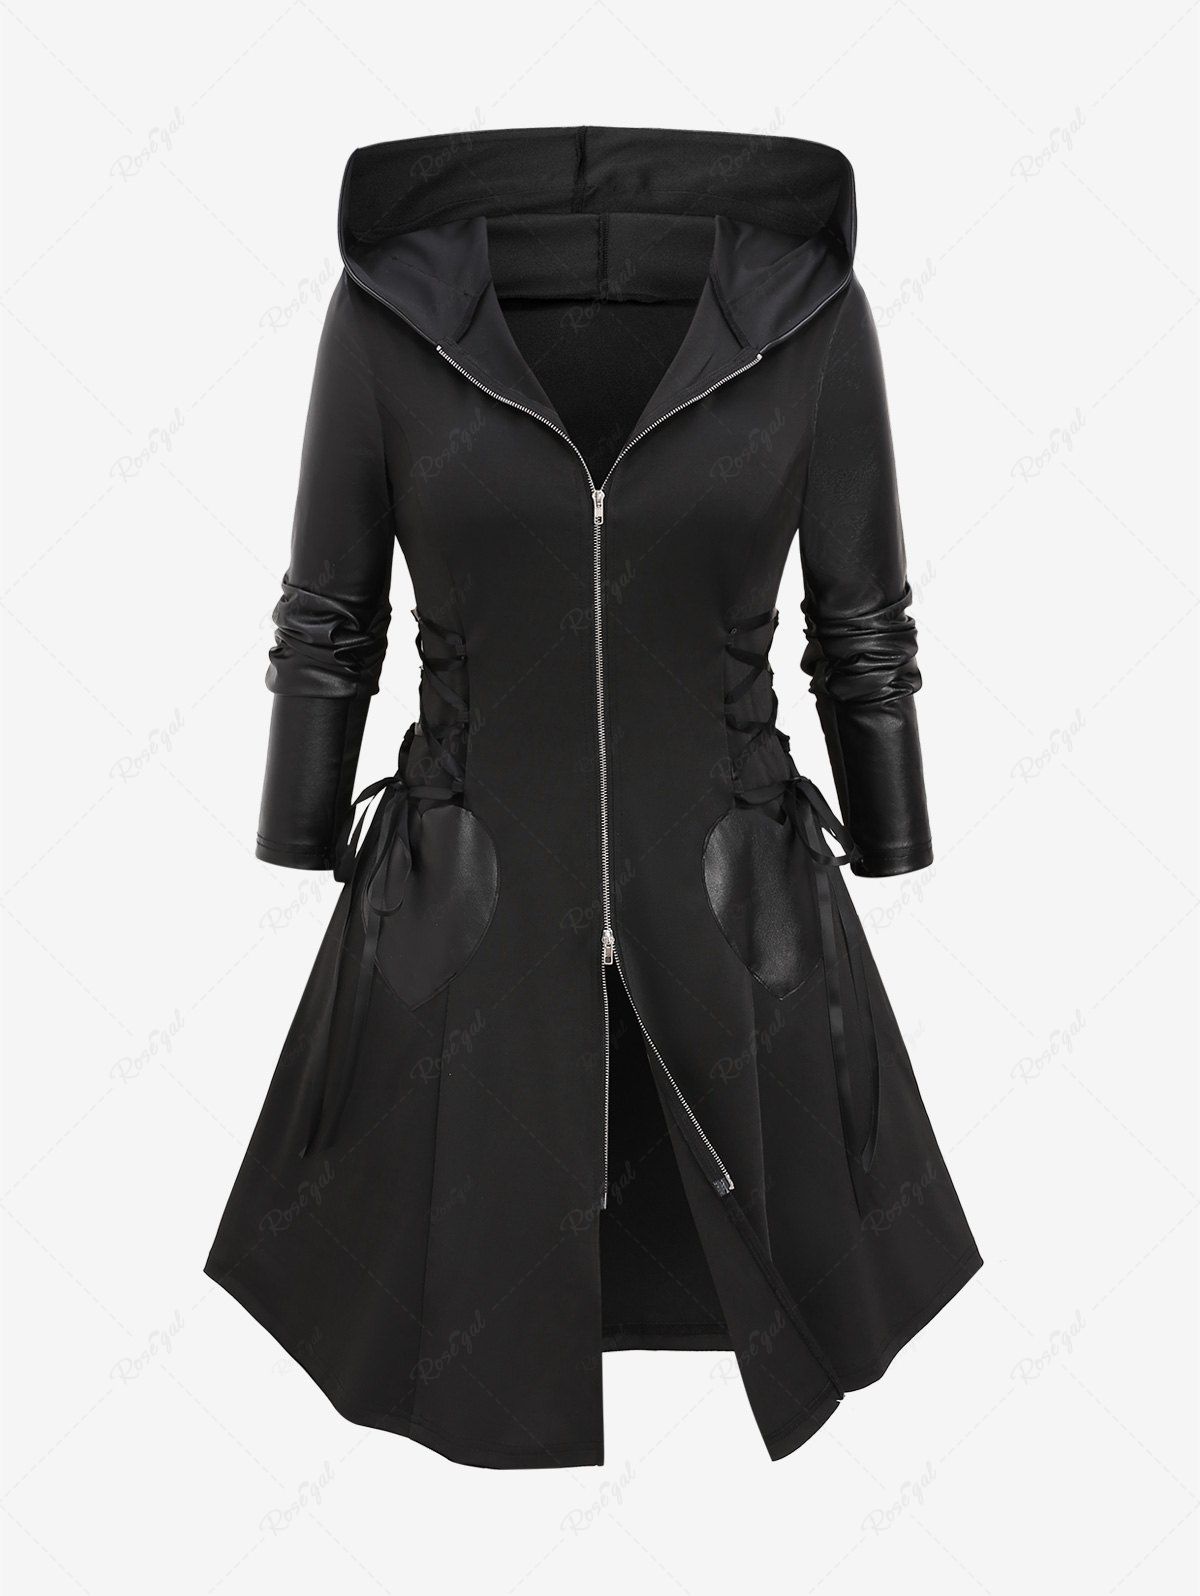 Trendy Plus Size Lace Up PU Leather Patchwork Hooded Zipper Coat  